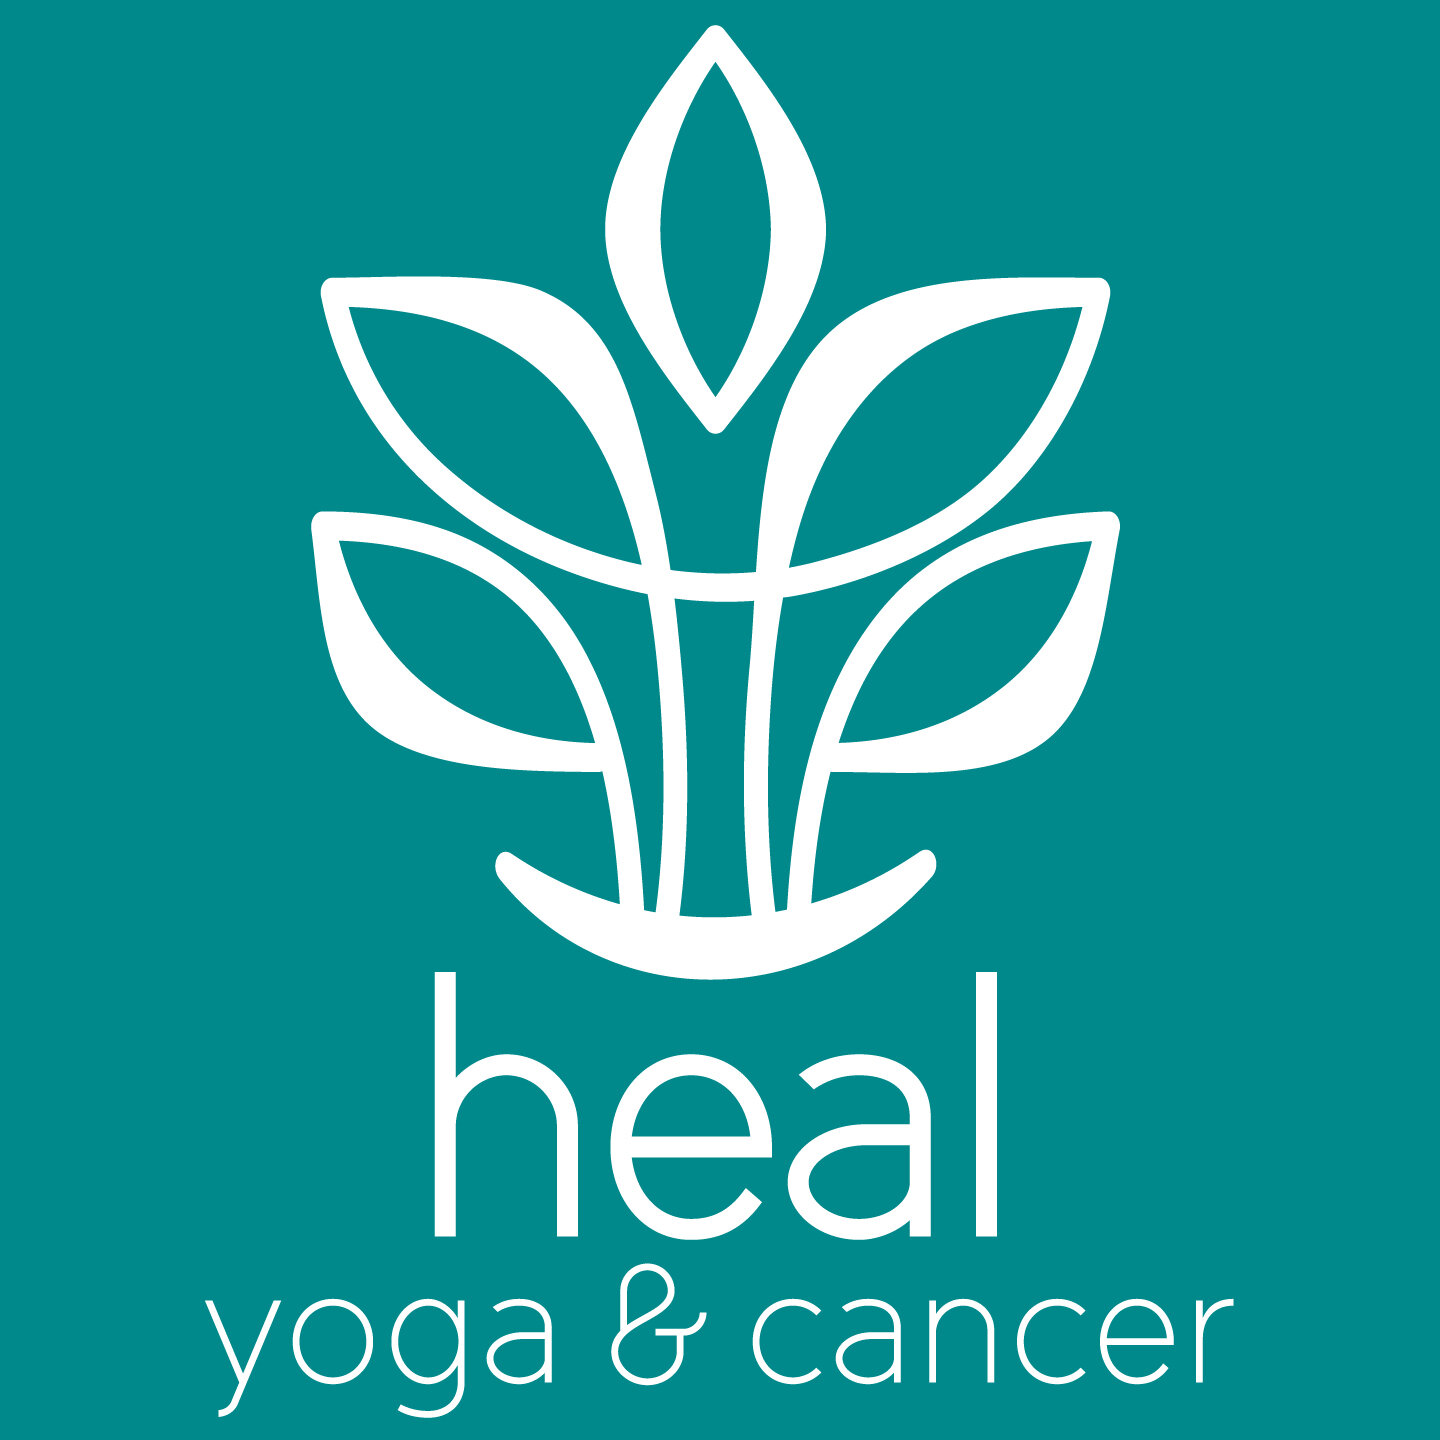 Yoga and Cancer